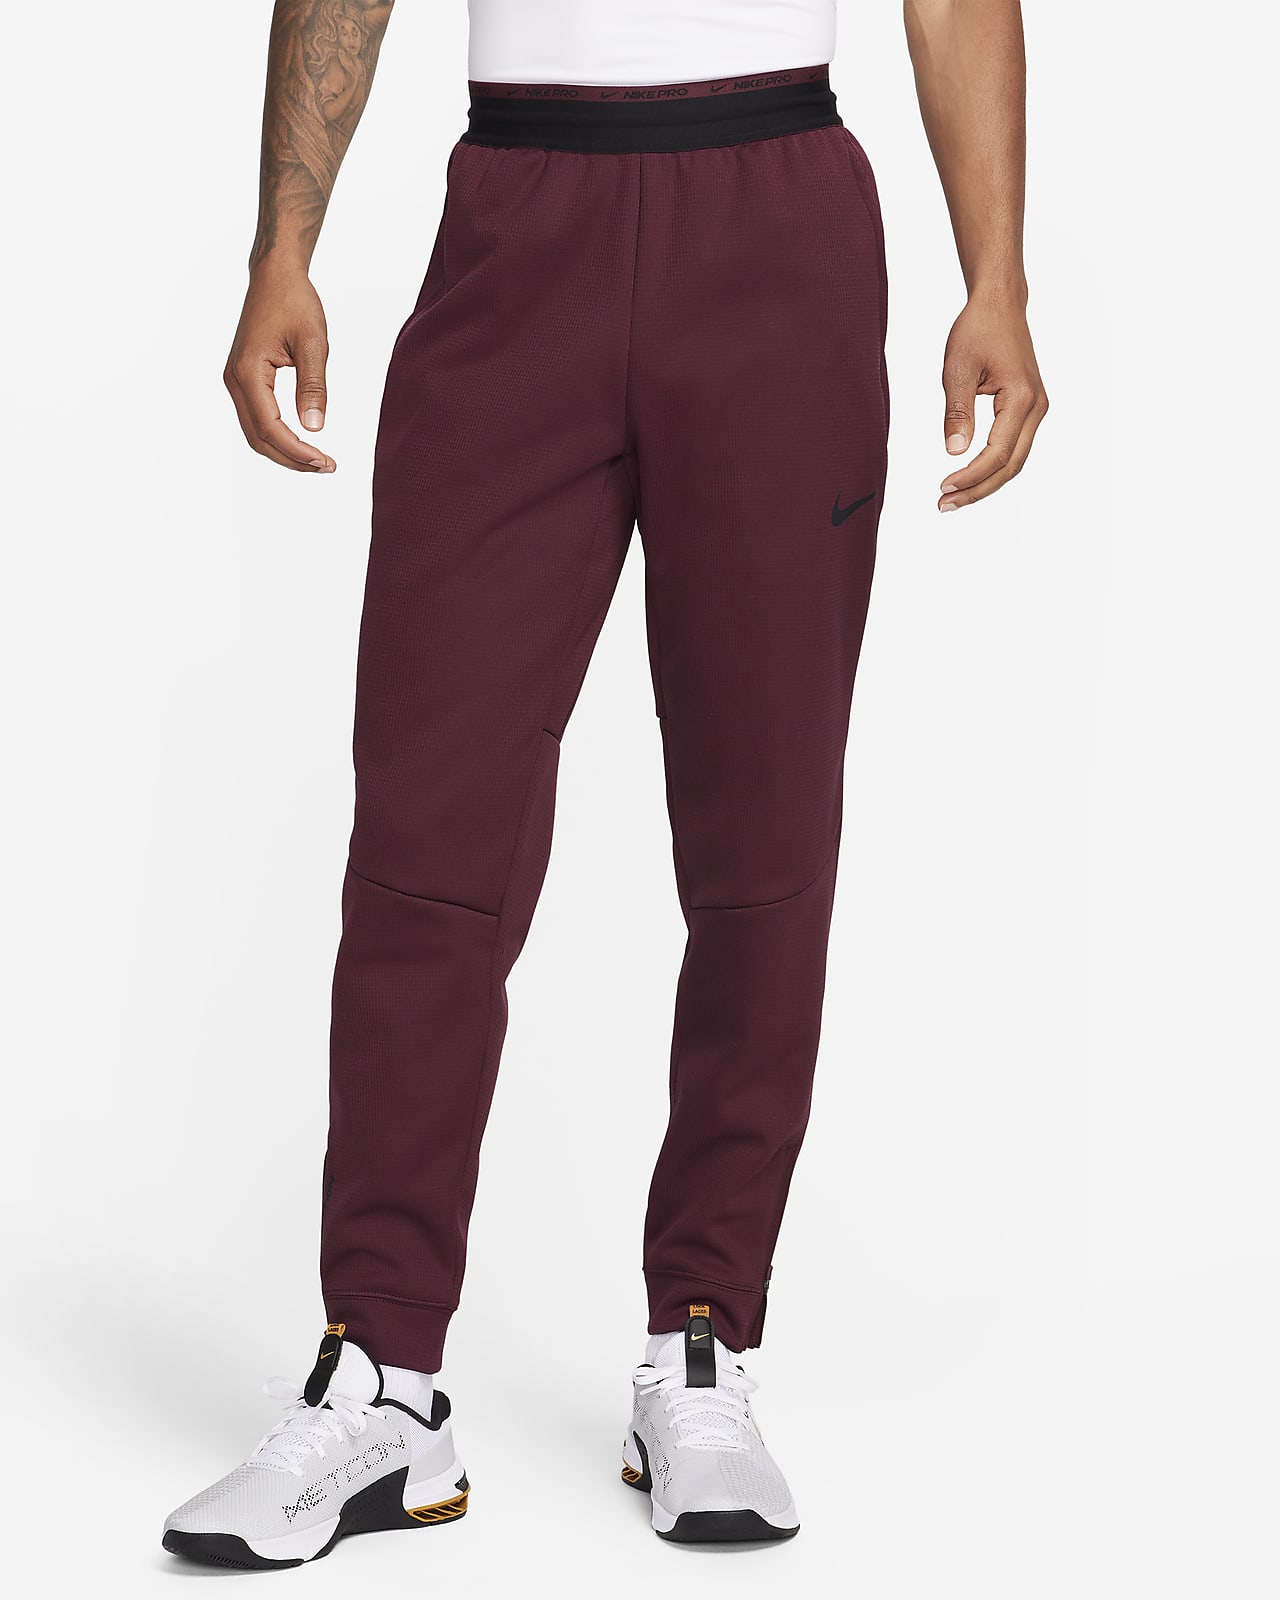 https://static.nike.com/a/images/t_PDP_1280_v1/f_auto,q_auto:eco/fe71e2a6-bcc8-4695-9c84-73df04c1c0b8/therma-sphere-fitness-trousers-Zfqt5w.png